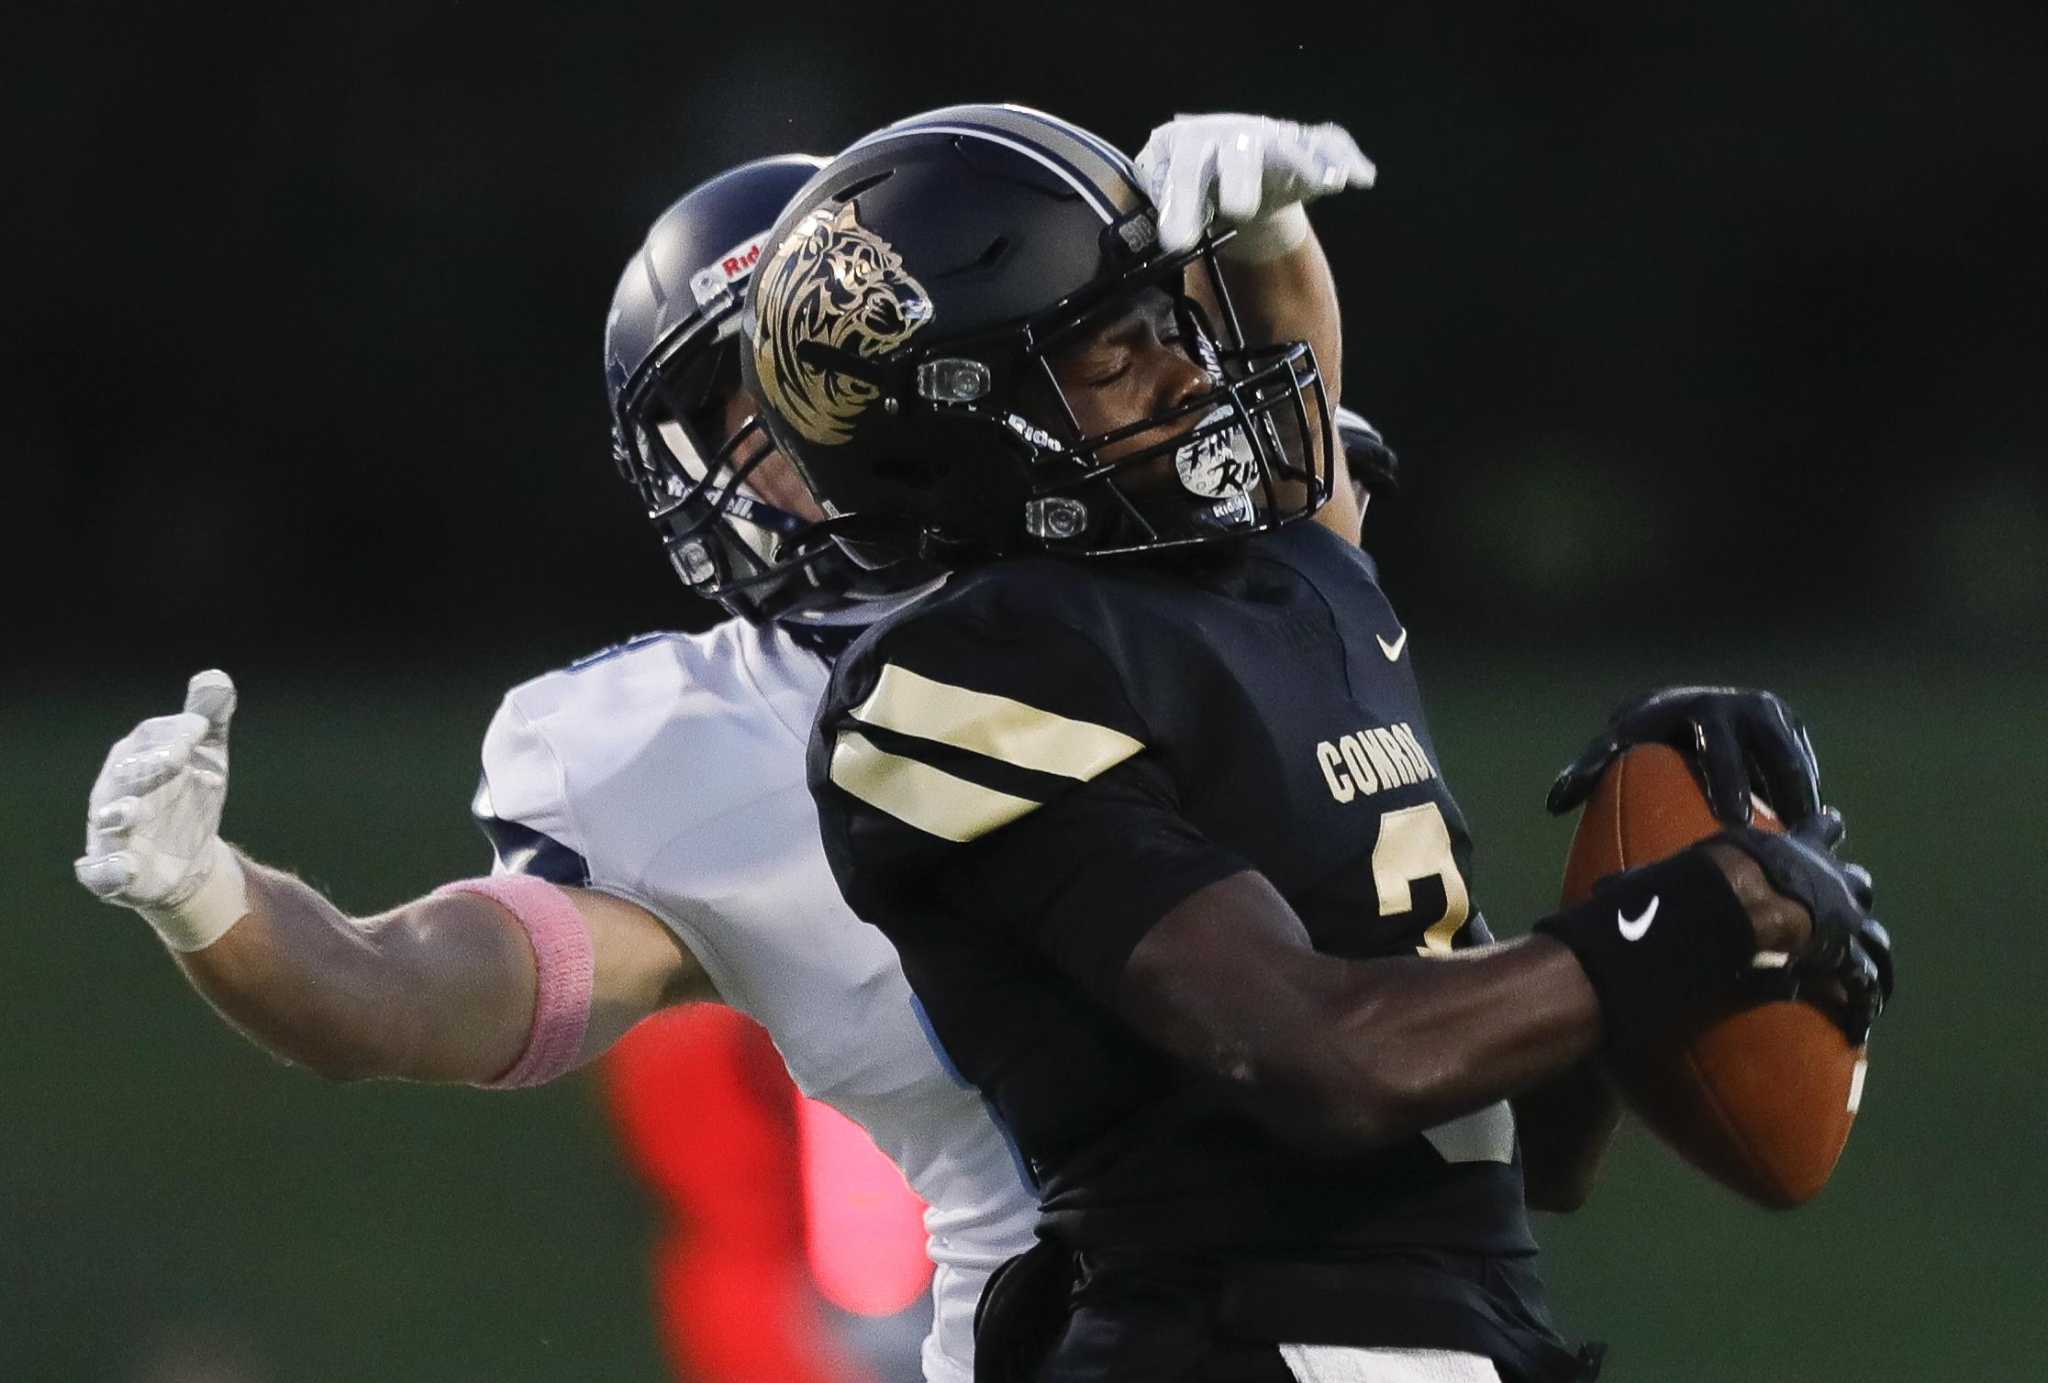 FOOTBALL: Conroe takes down Kingwood for first win of season